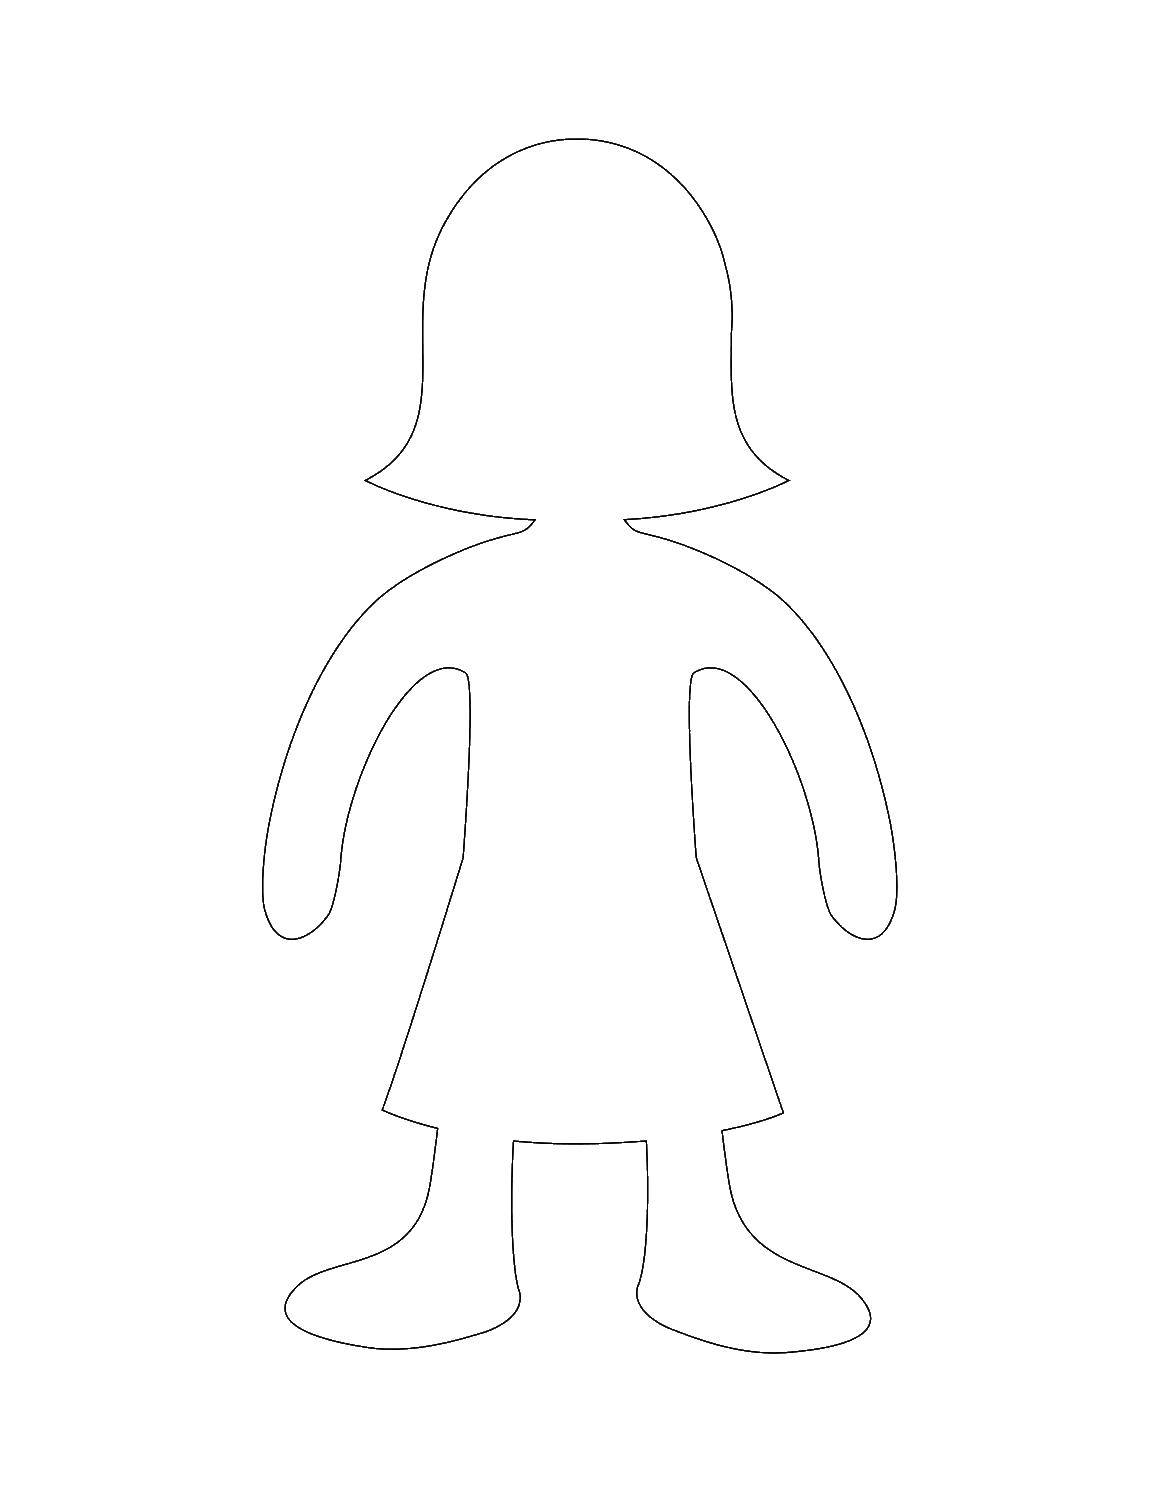 Coloring Doll. Category The contour of the doll . Tags:  doll.